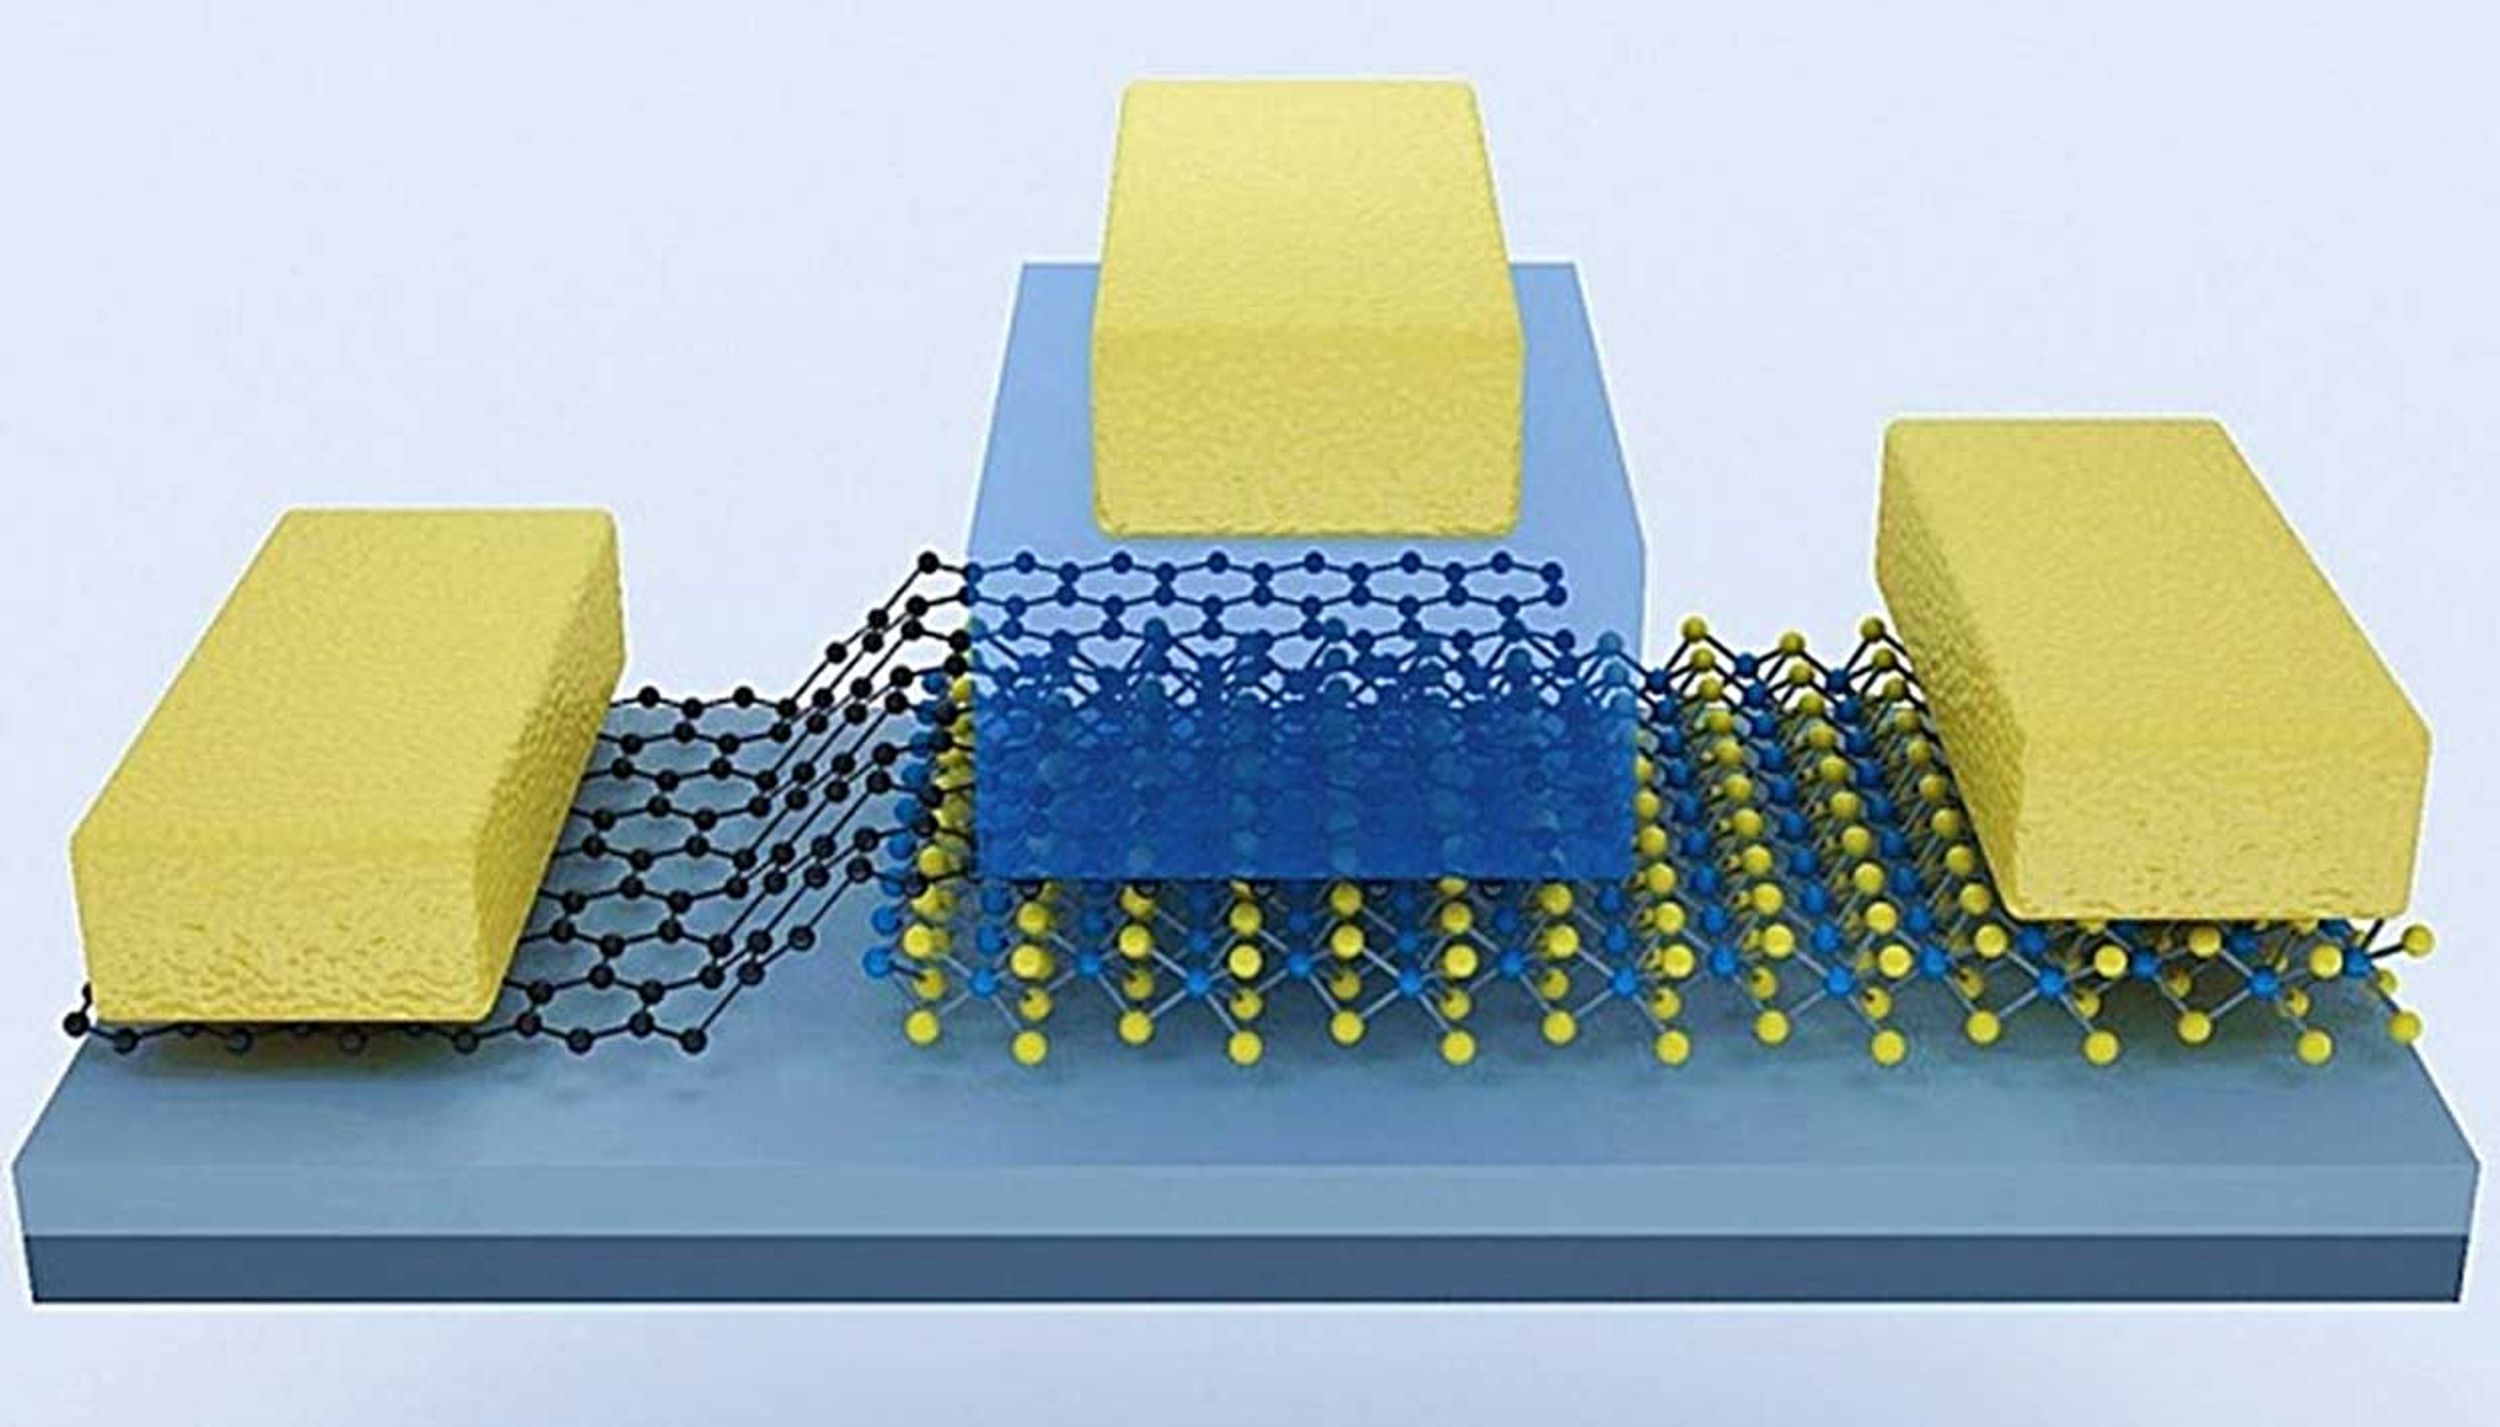 An illustration of the transistor showing graphene (black hexagons) and molybdenum disulfide (blue and yellow layered structure) among other components